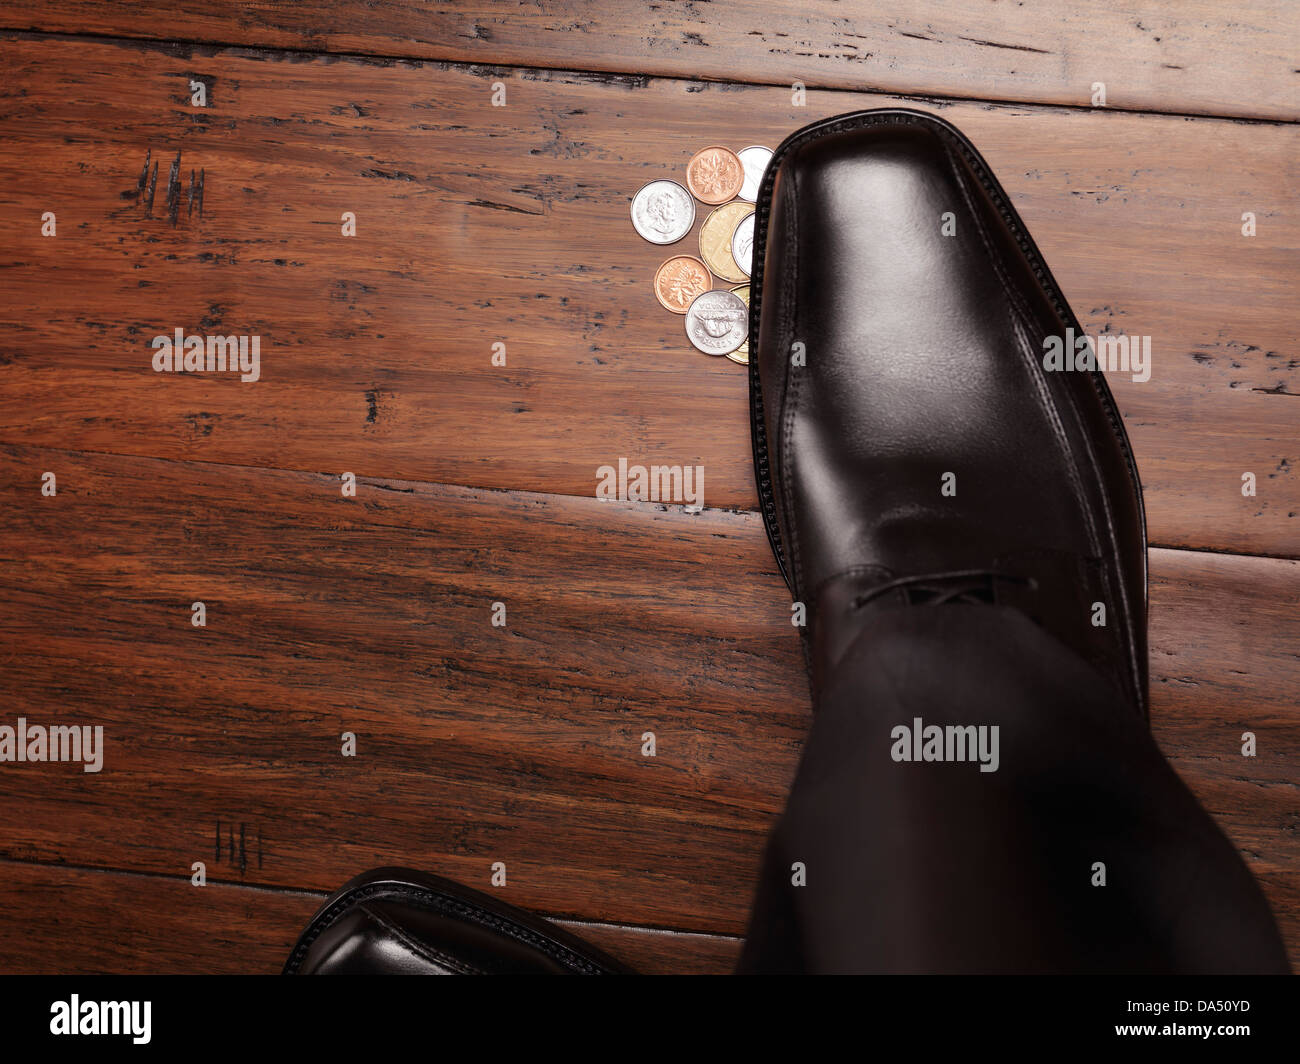 Closeup of man shoe standing on coins, money found on the floor concept Stock Photo